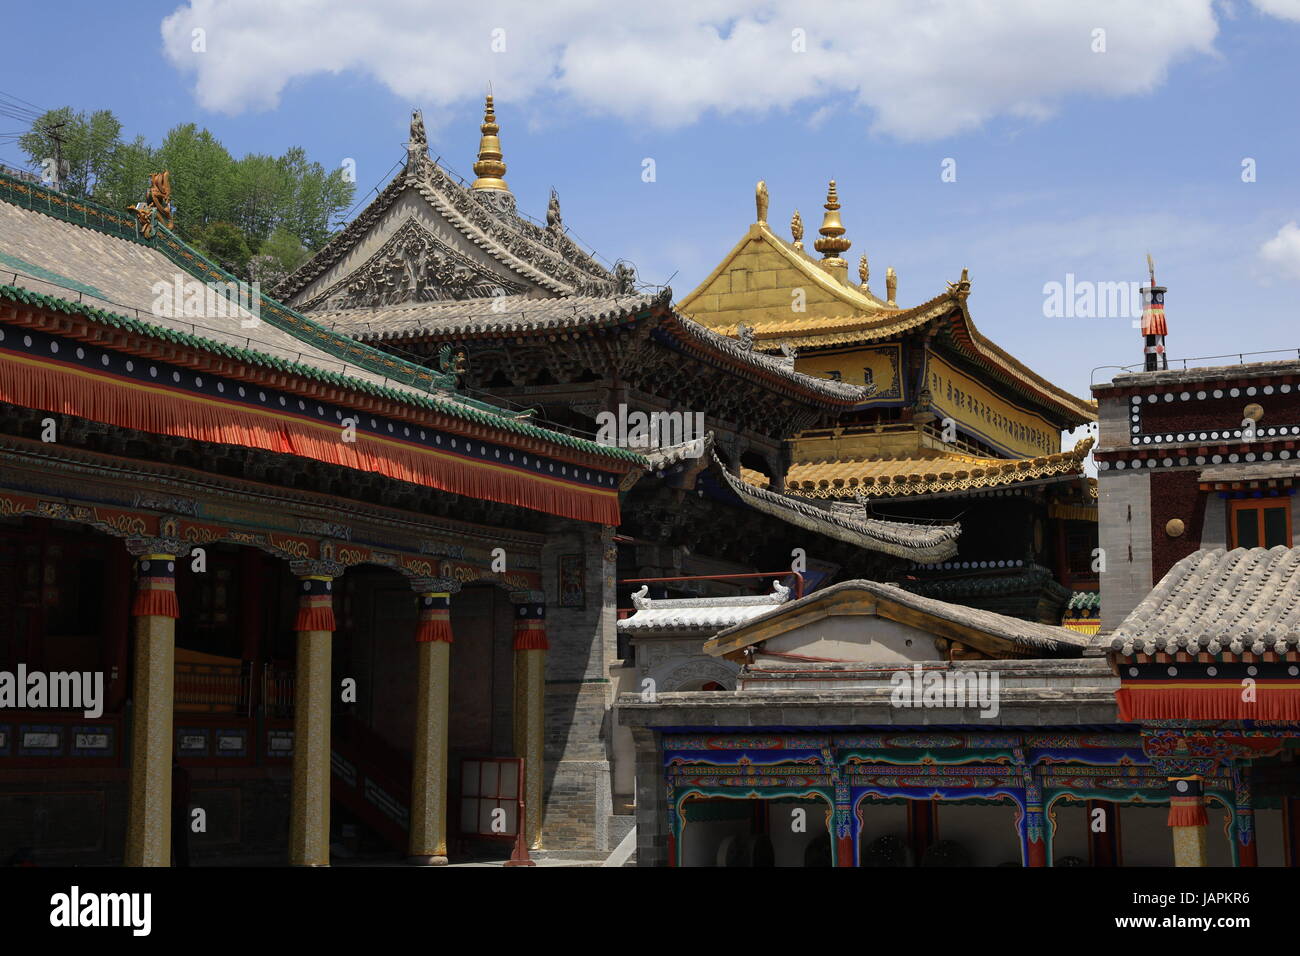 June 7, 2017 - Xining, Xining, China - Xining, CHINA-June 7 2017: (EDITORIAL USE ONLY. CHINA OUT) ..The Tar Monastery, one of the six most important monasteries of the Gelukpa (Yellow Hat) school of Tibetan Buddhism, is a large complex featuring dozens of halls and towers on a mountainside in both Tibetan and Han architectural styles. Located in Huangzhong County, 25 kilometers from Xining, northwest China's Qinghai Province, the monastery was built in 1560 in honor of the founder of Gelukpa School, Tsongkhapa. It's known for its many butter sculptures, mural paintings and barbolas which fully Stock Photo